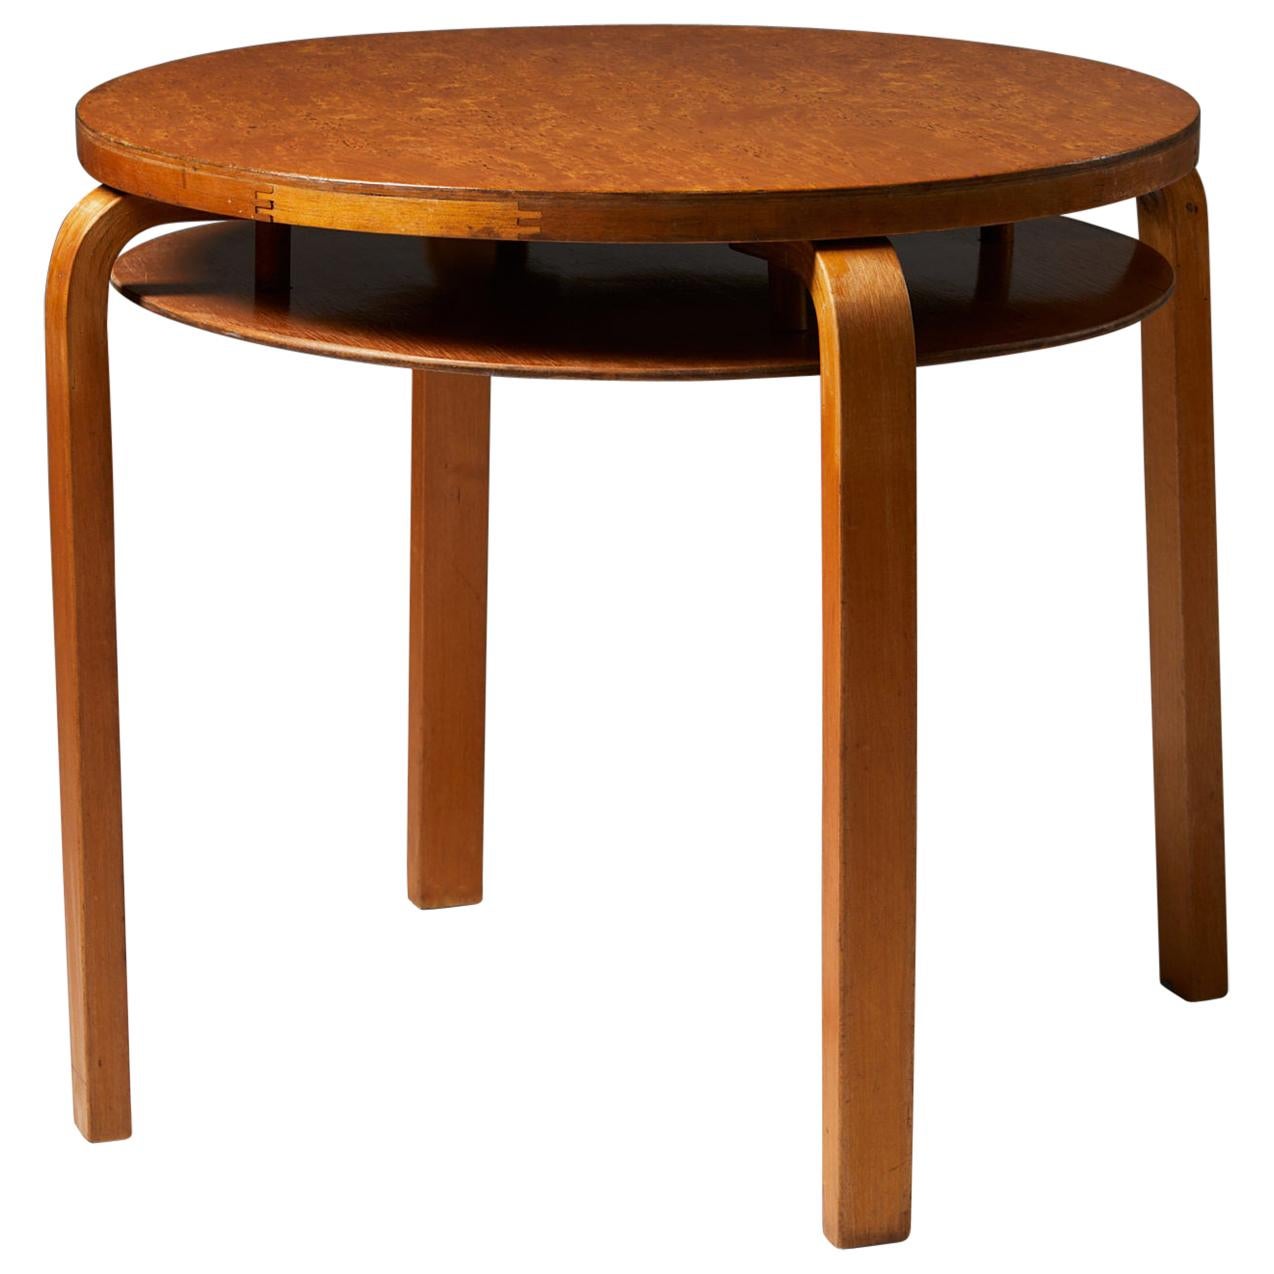 Occasional Table Model 907 Designed by Alvar Aalto for Finmar